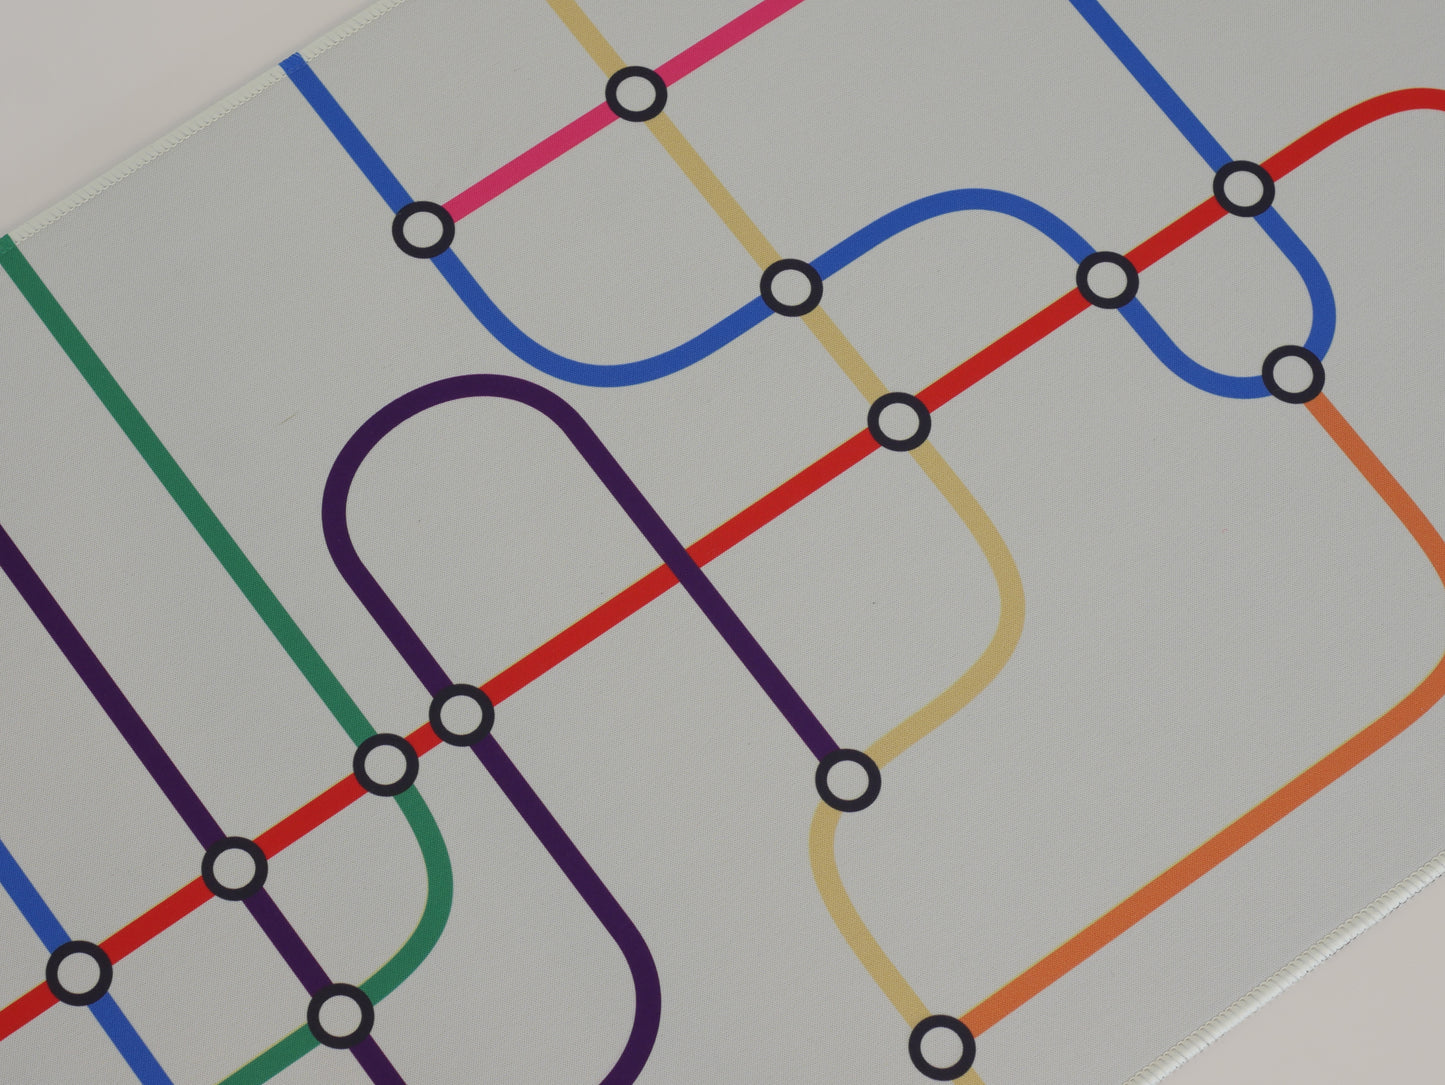 The middle of the subway transit desk mat. The desk mat has a white background and colorful lines.